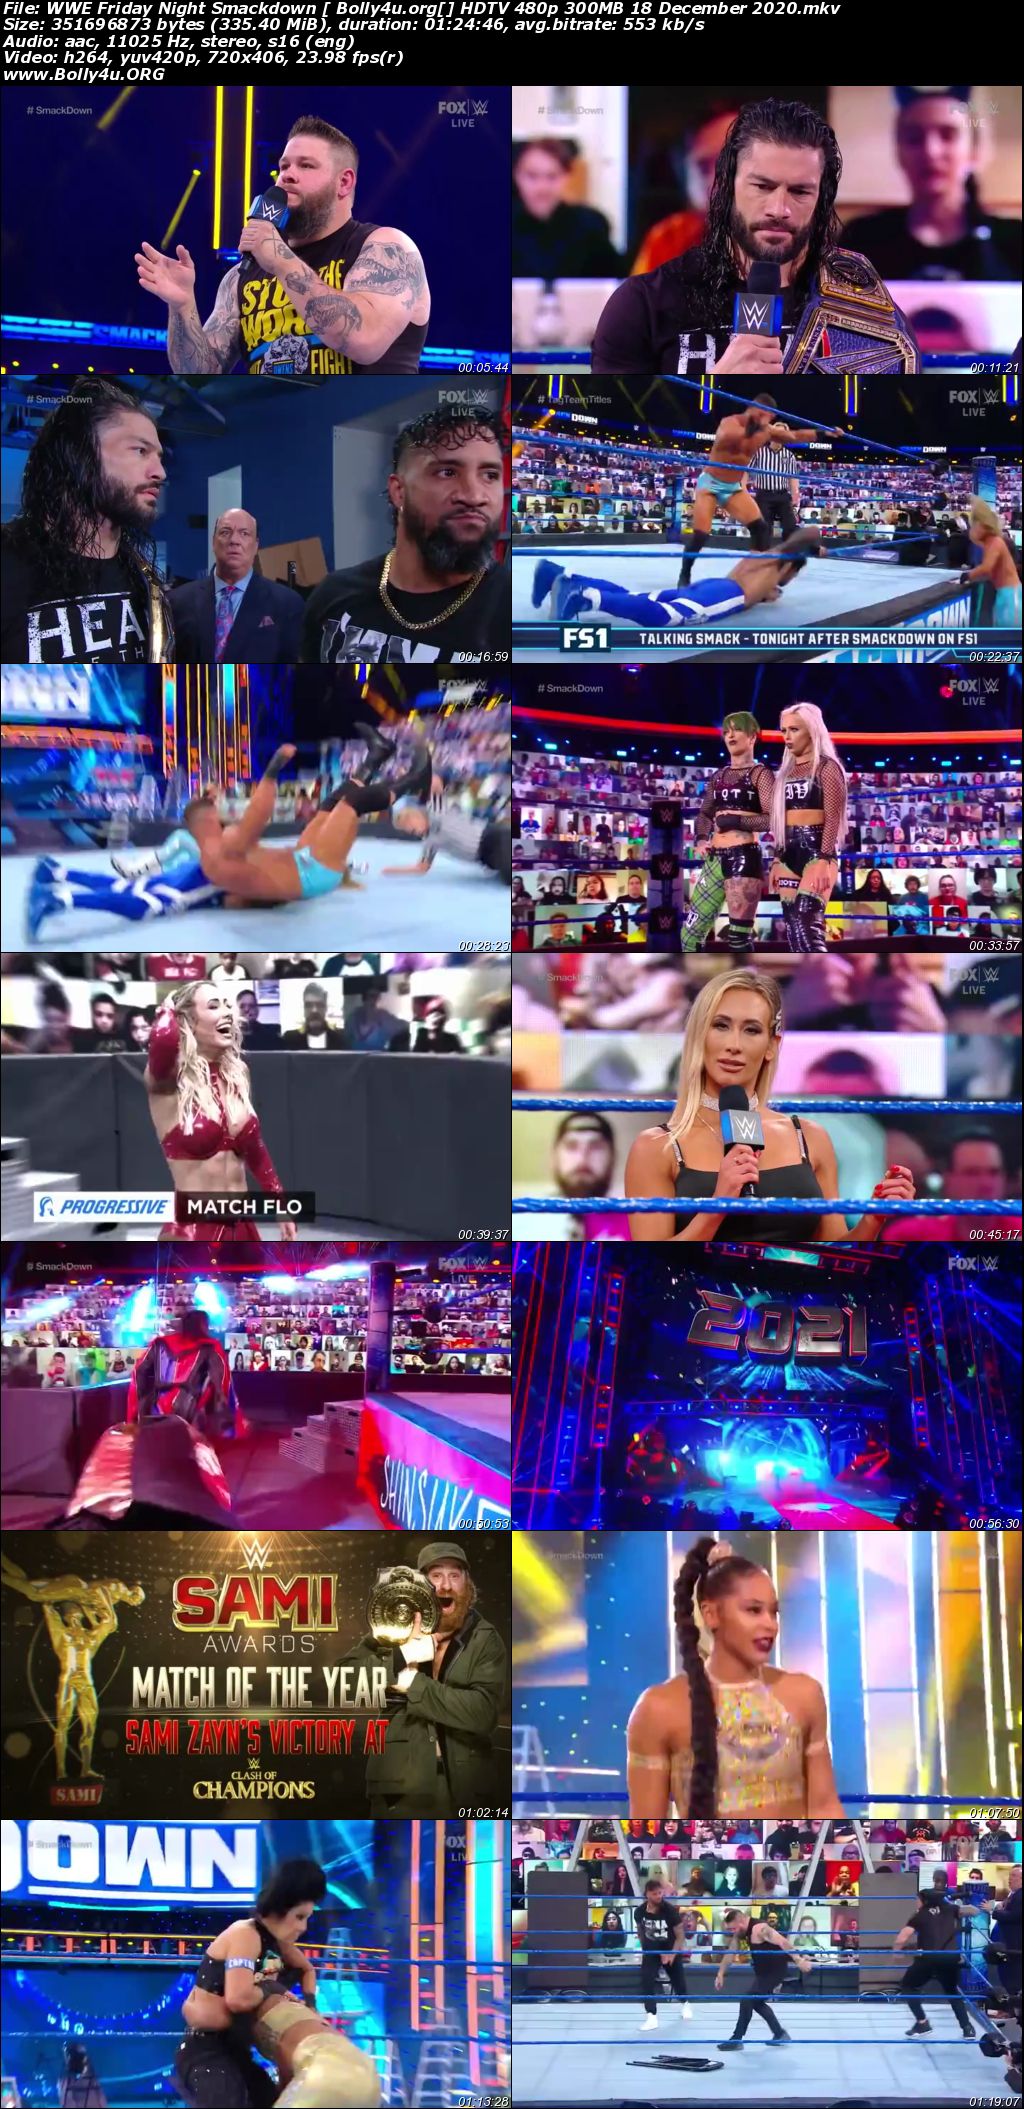 WWE Friday Night Smackdown HDTV 480p 300MB 18 December 2020 Download